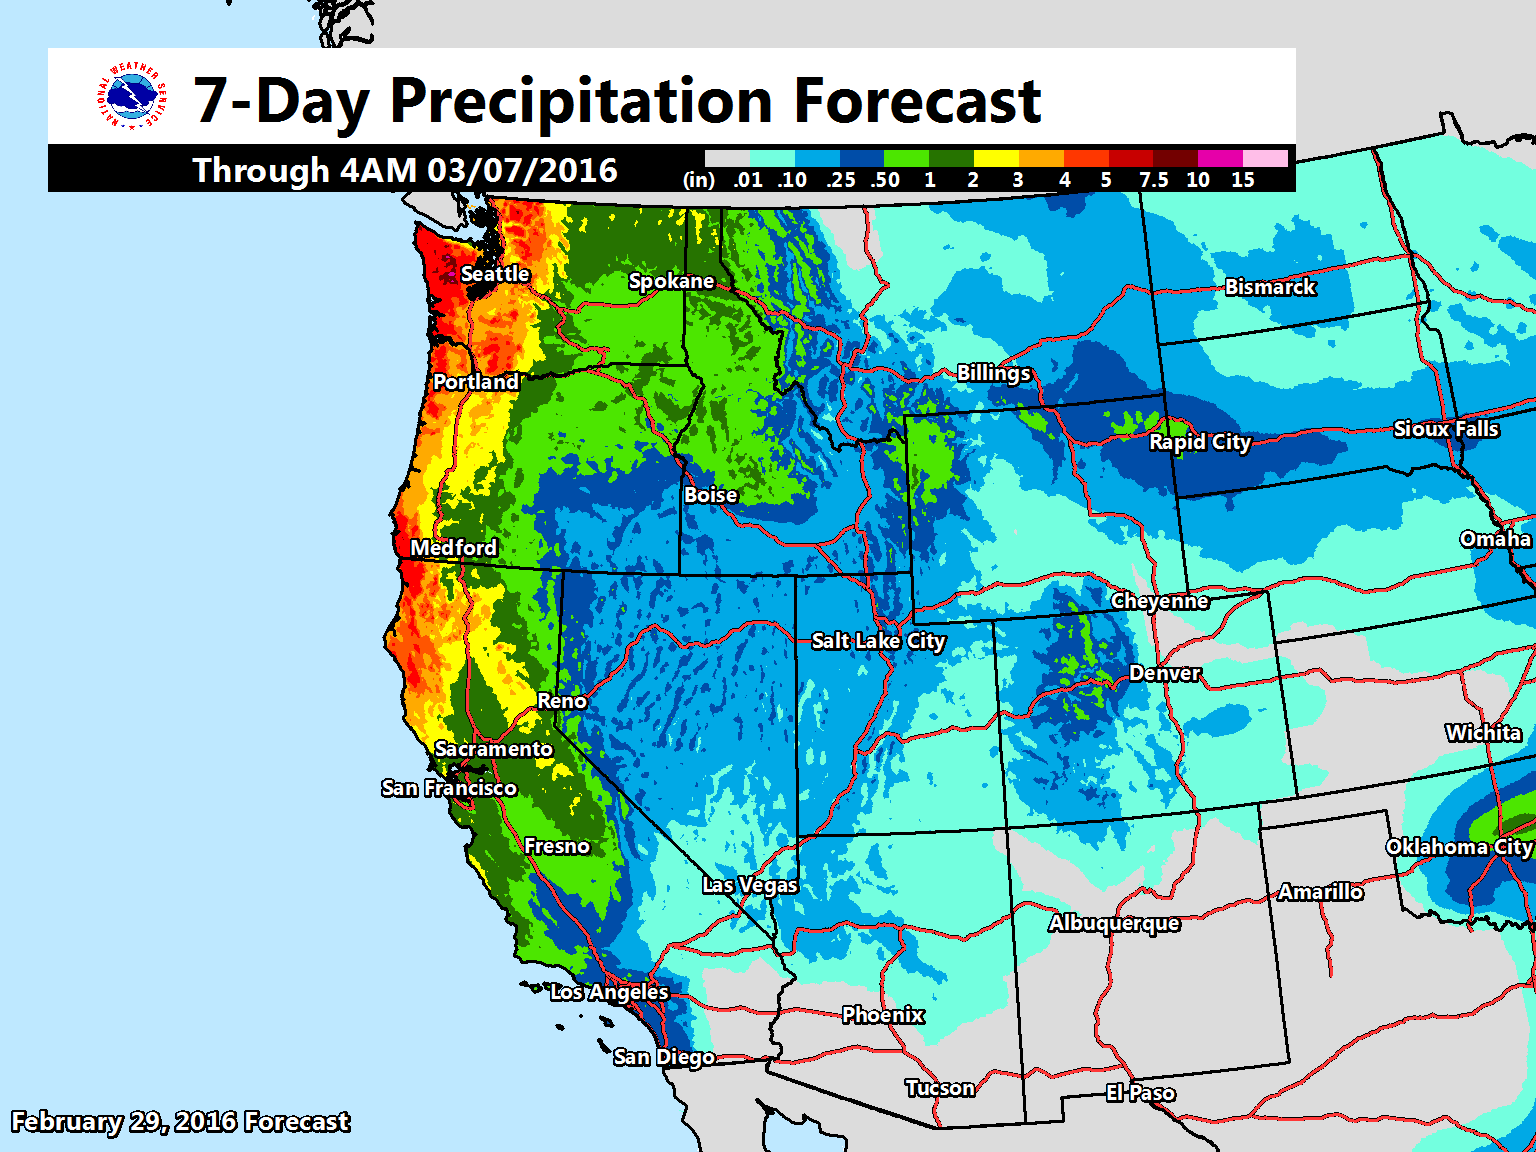 "As has been recently advertised, a more active storm track is becoming more likely and will result in widespread precipitation into this weekend and next week. The image shows the 7-day precipitation forecast across the West." - NOAA, Feb. 29